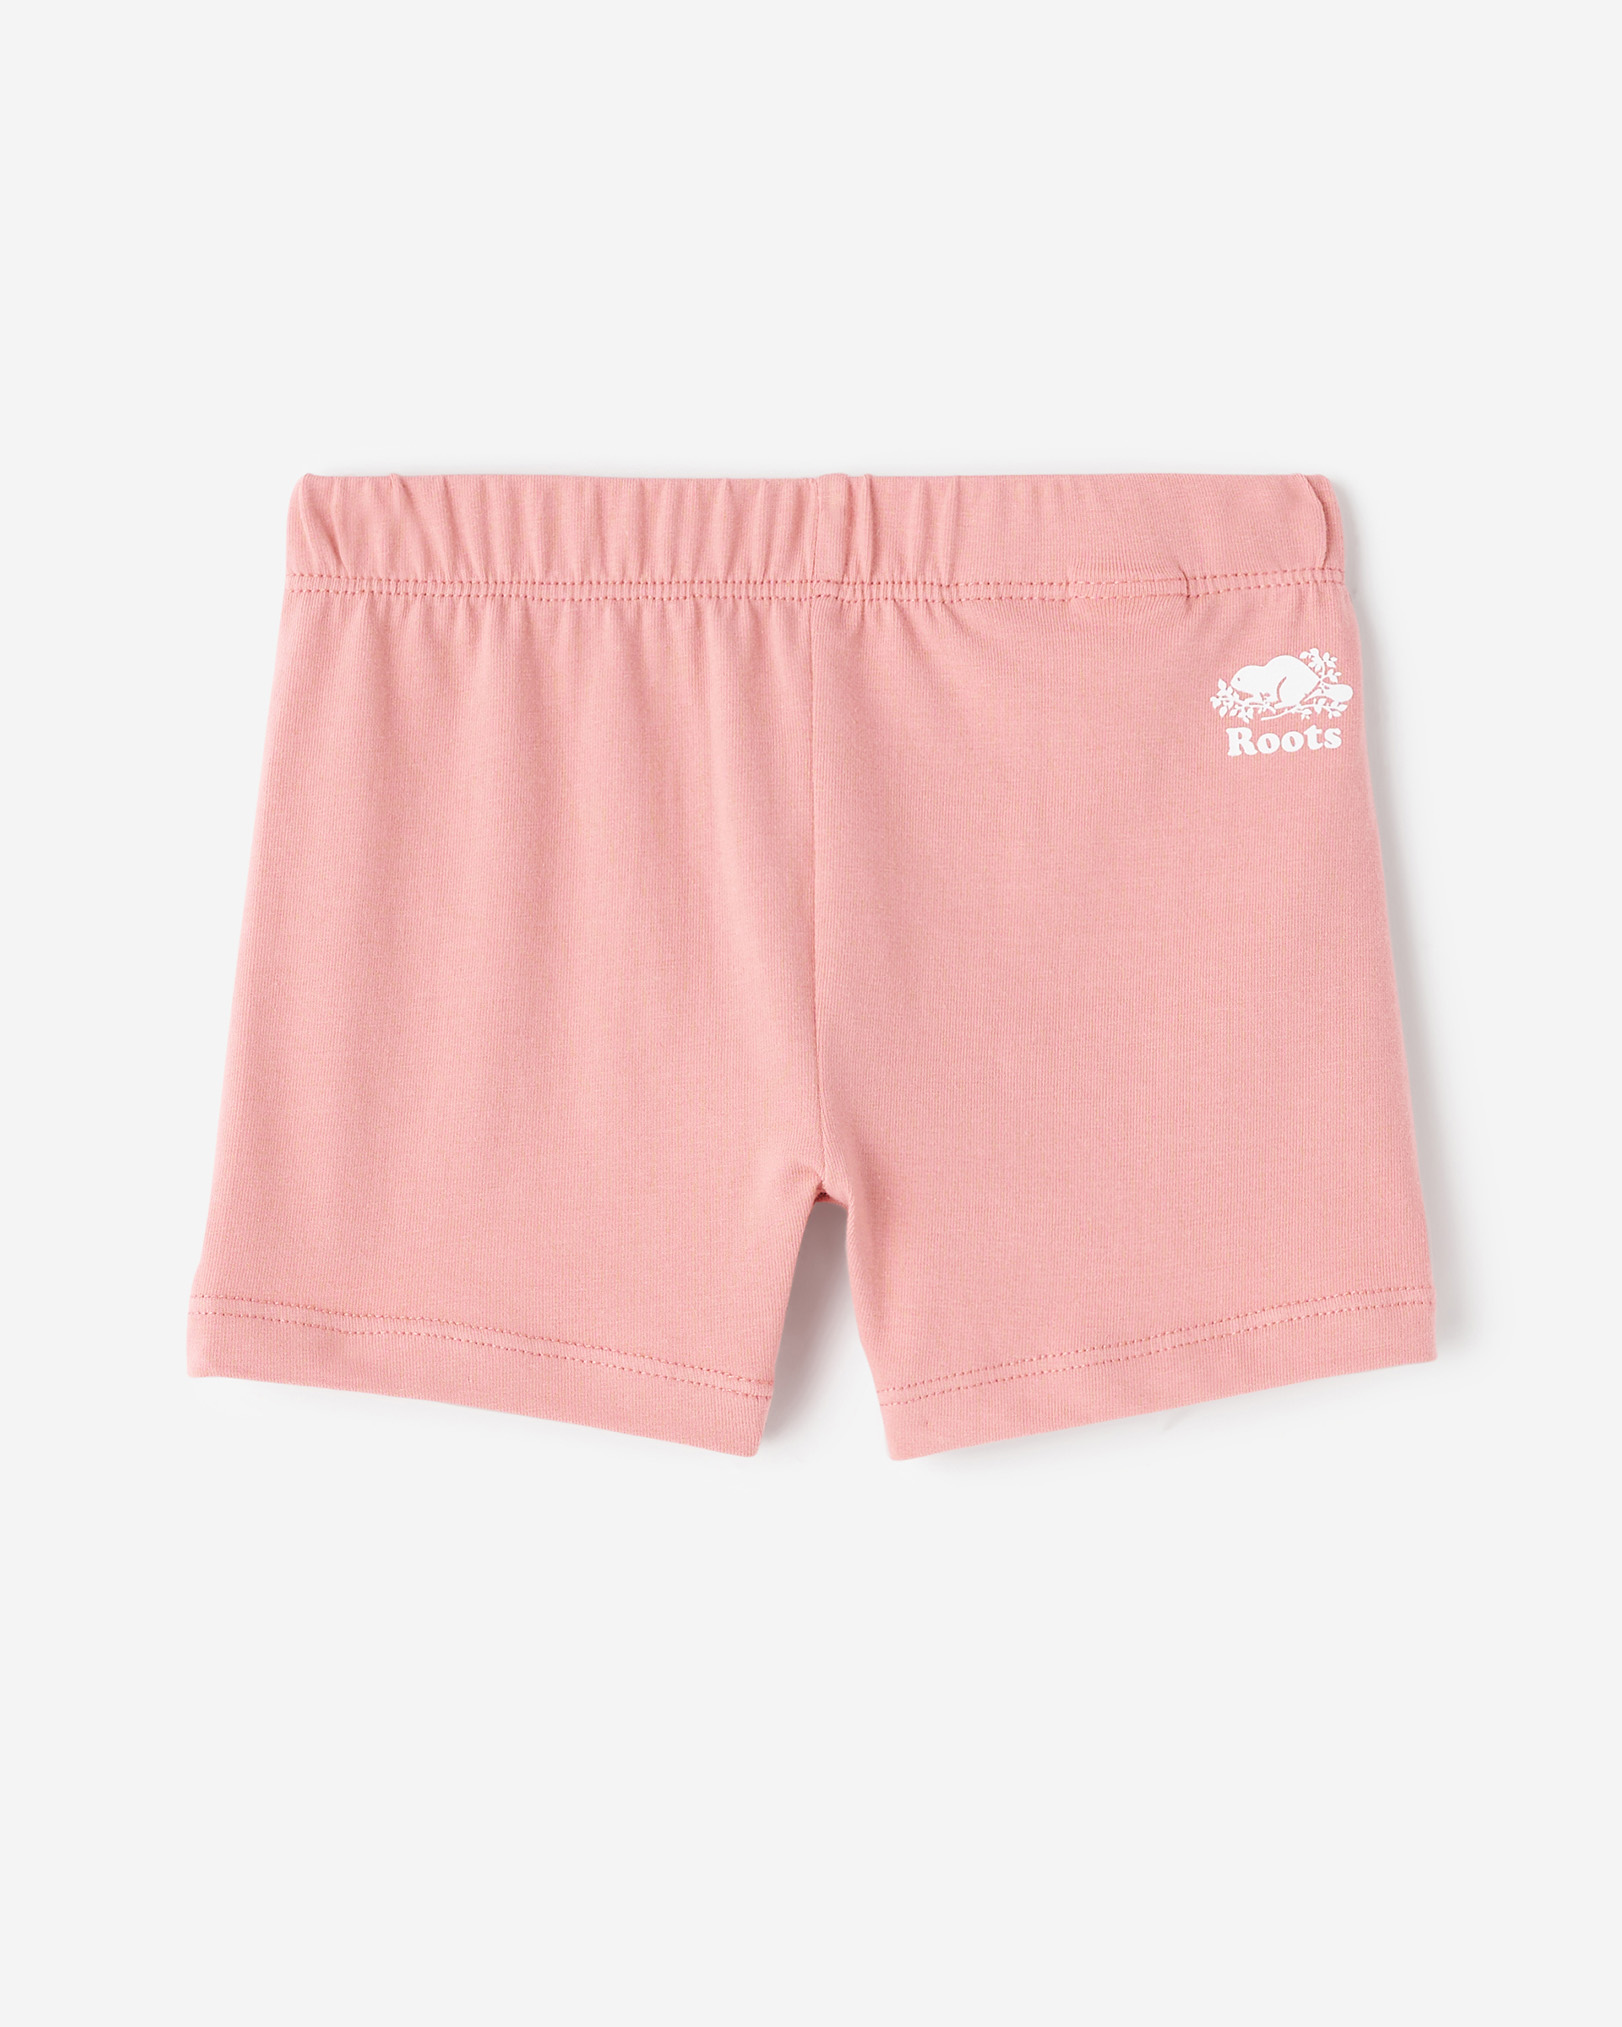 Roots Toddler Girl's Cooper Bike Short in Mauveglow